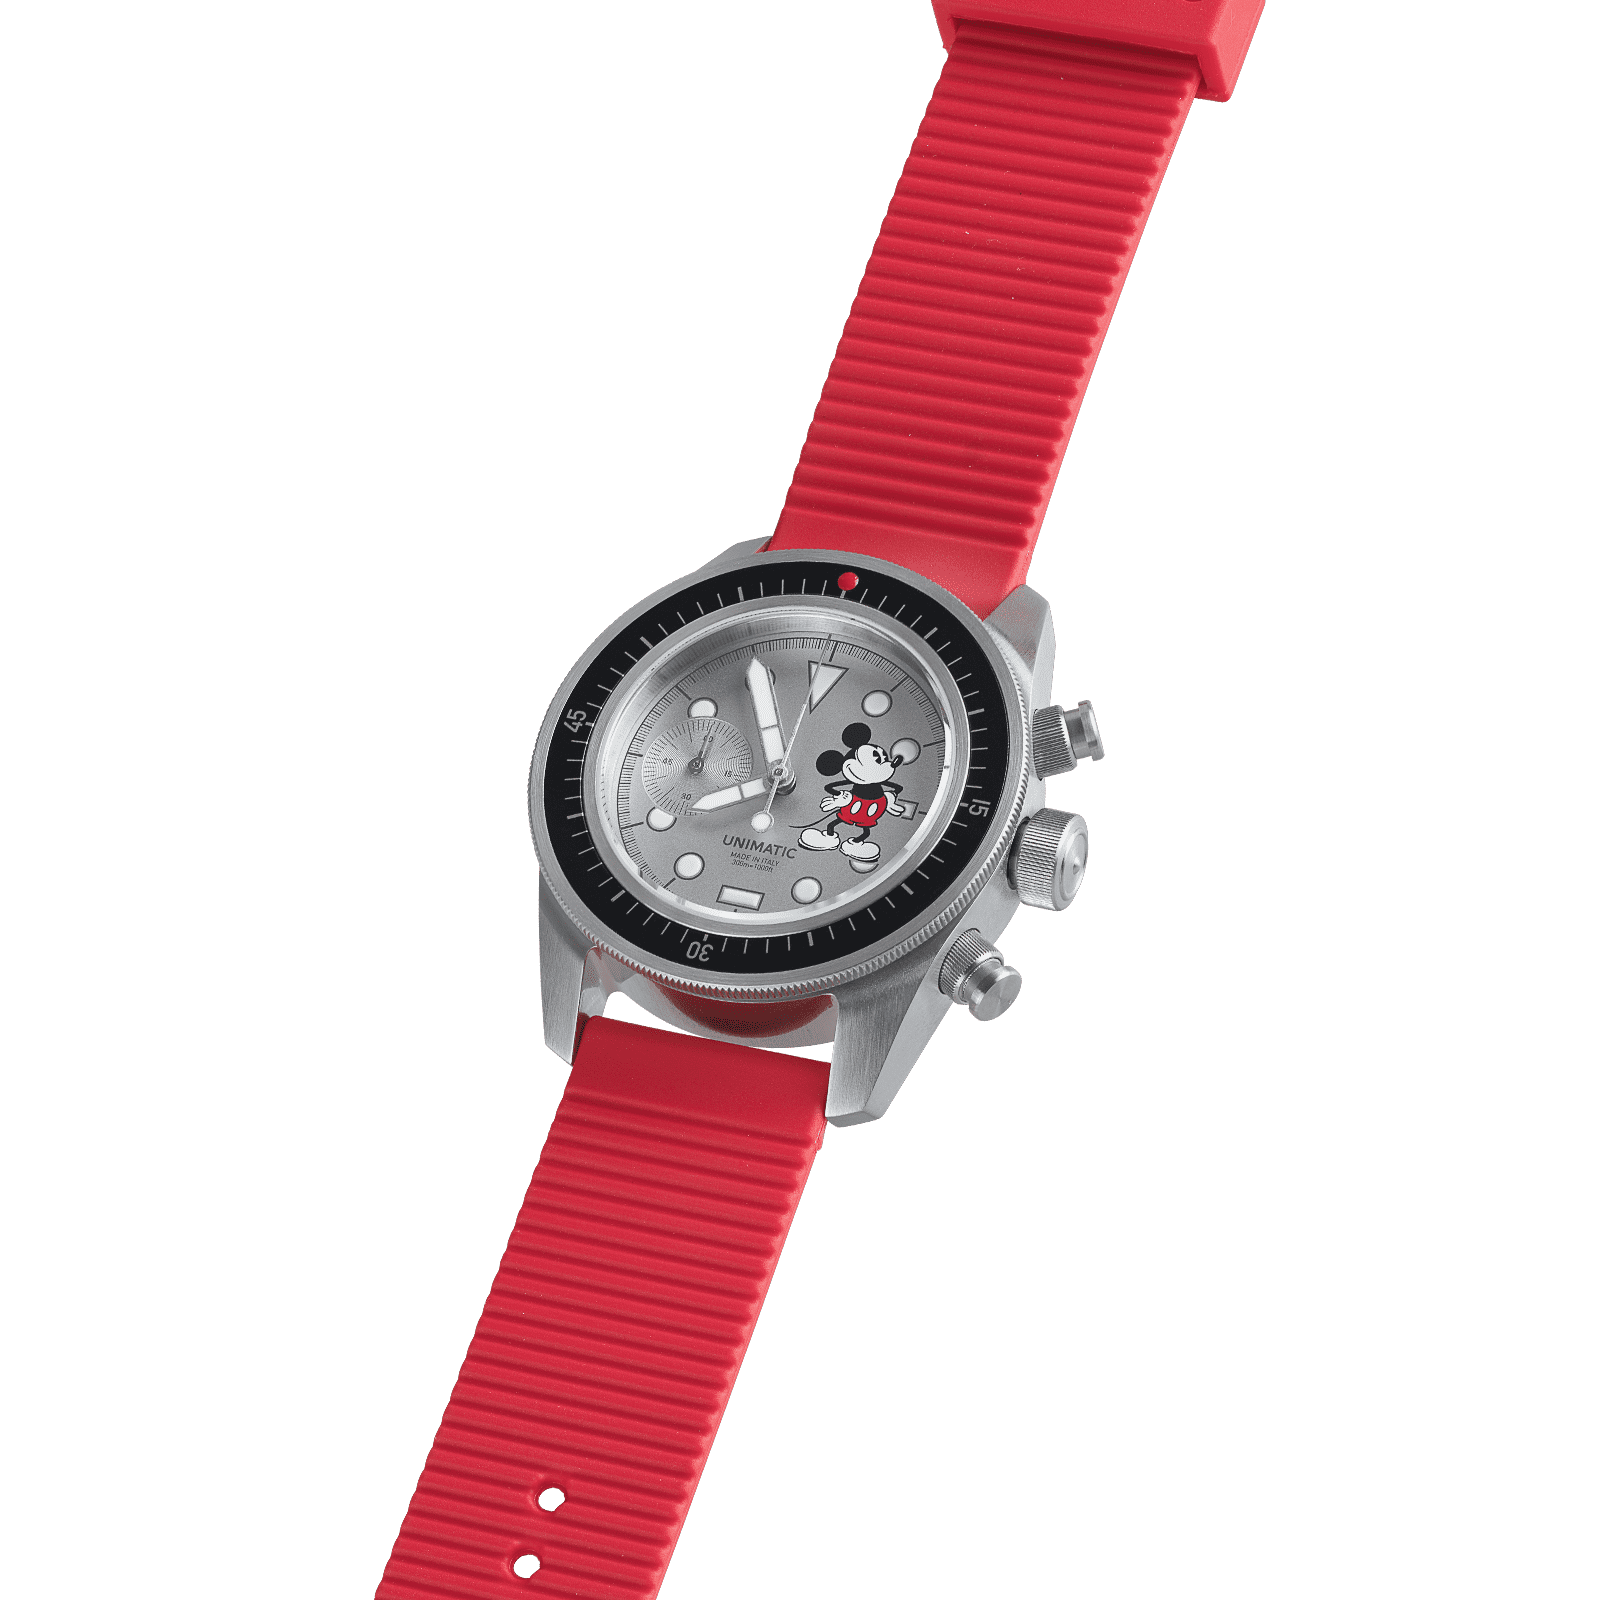 U3-HS • UNIMATIC WATCHES – Limited edition watches